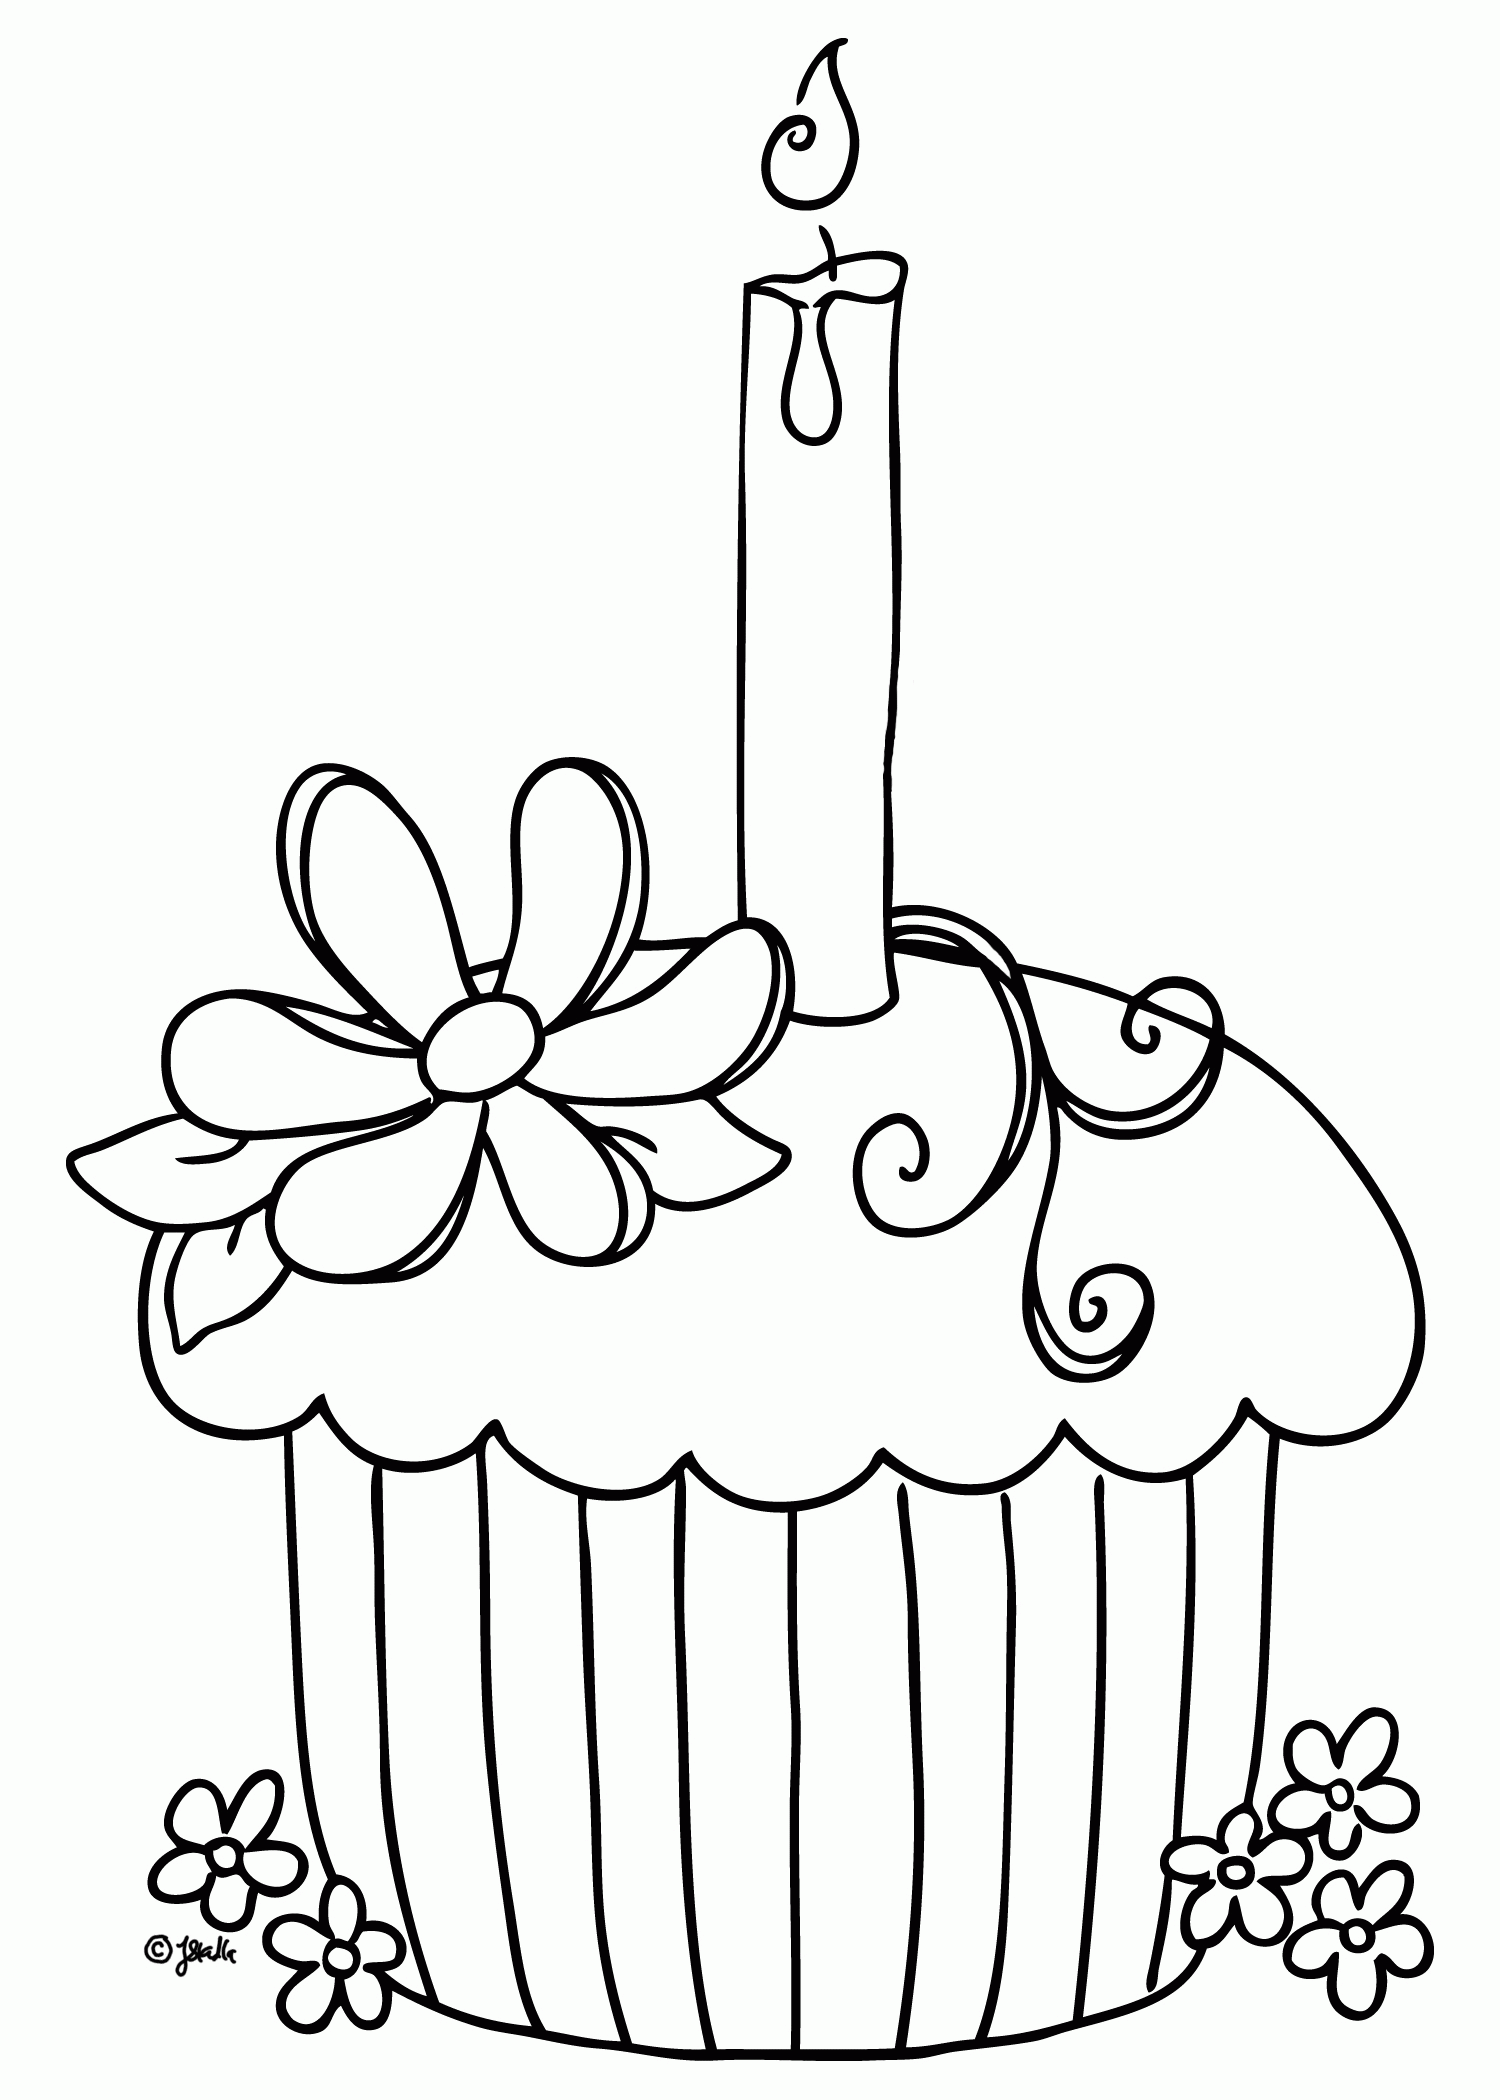 Cake Cupcake Coloring Pages - Coloring Pages For All Ages